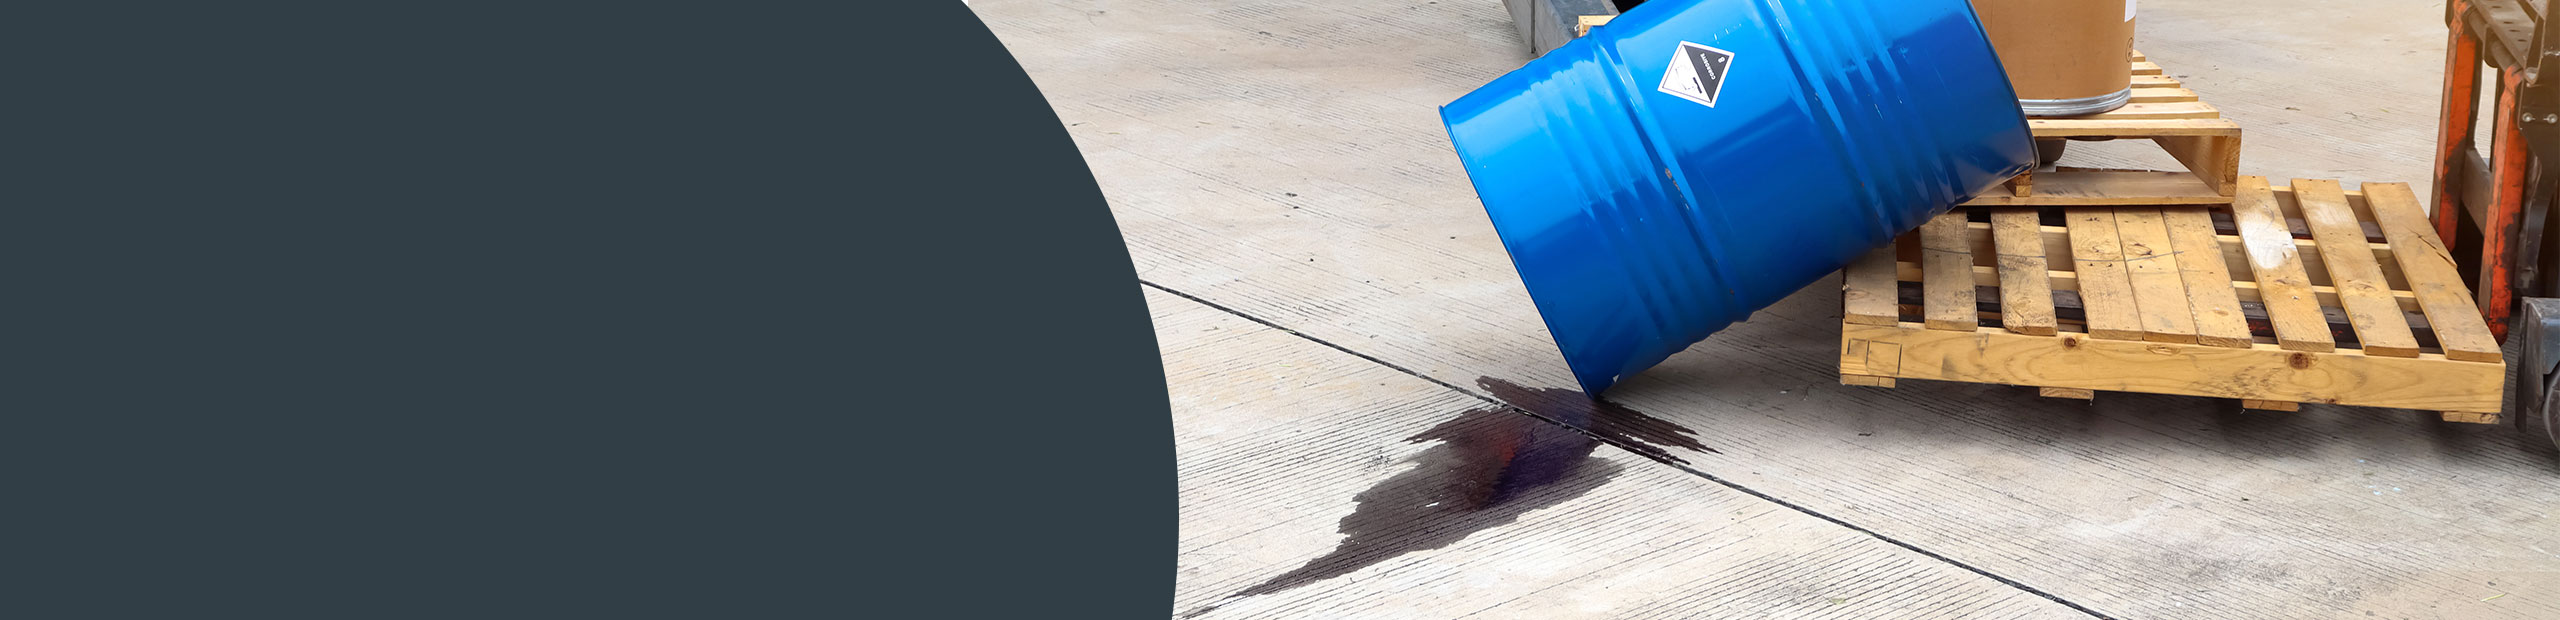 Chemical Spill Cleaning - Lewisham